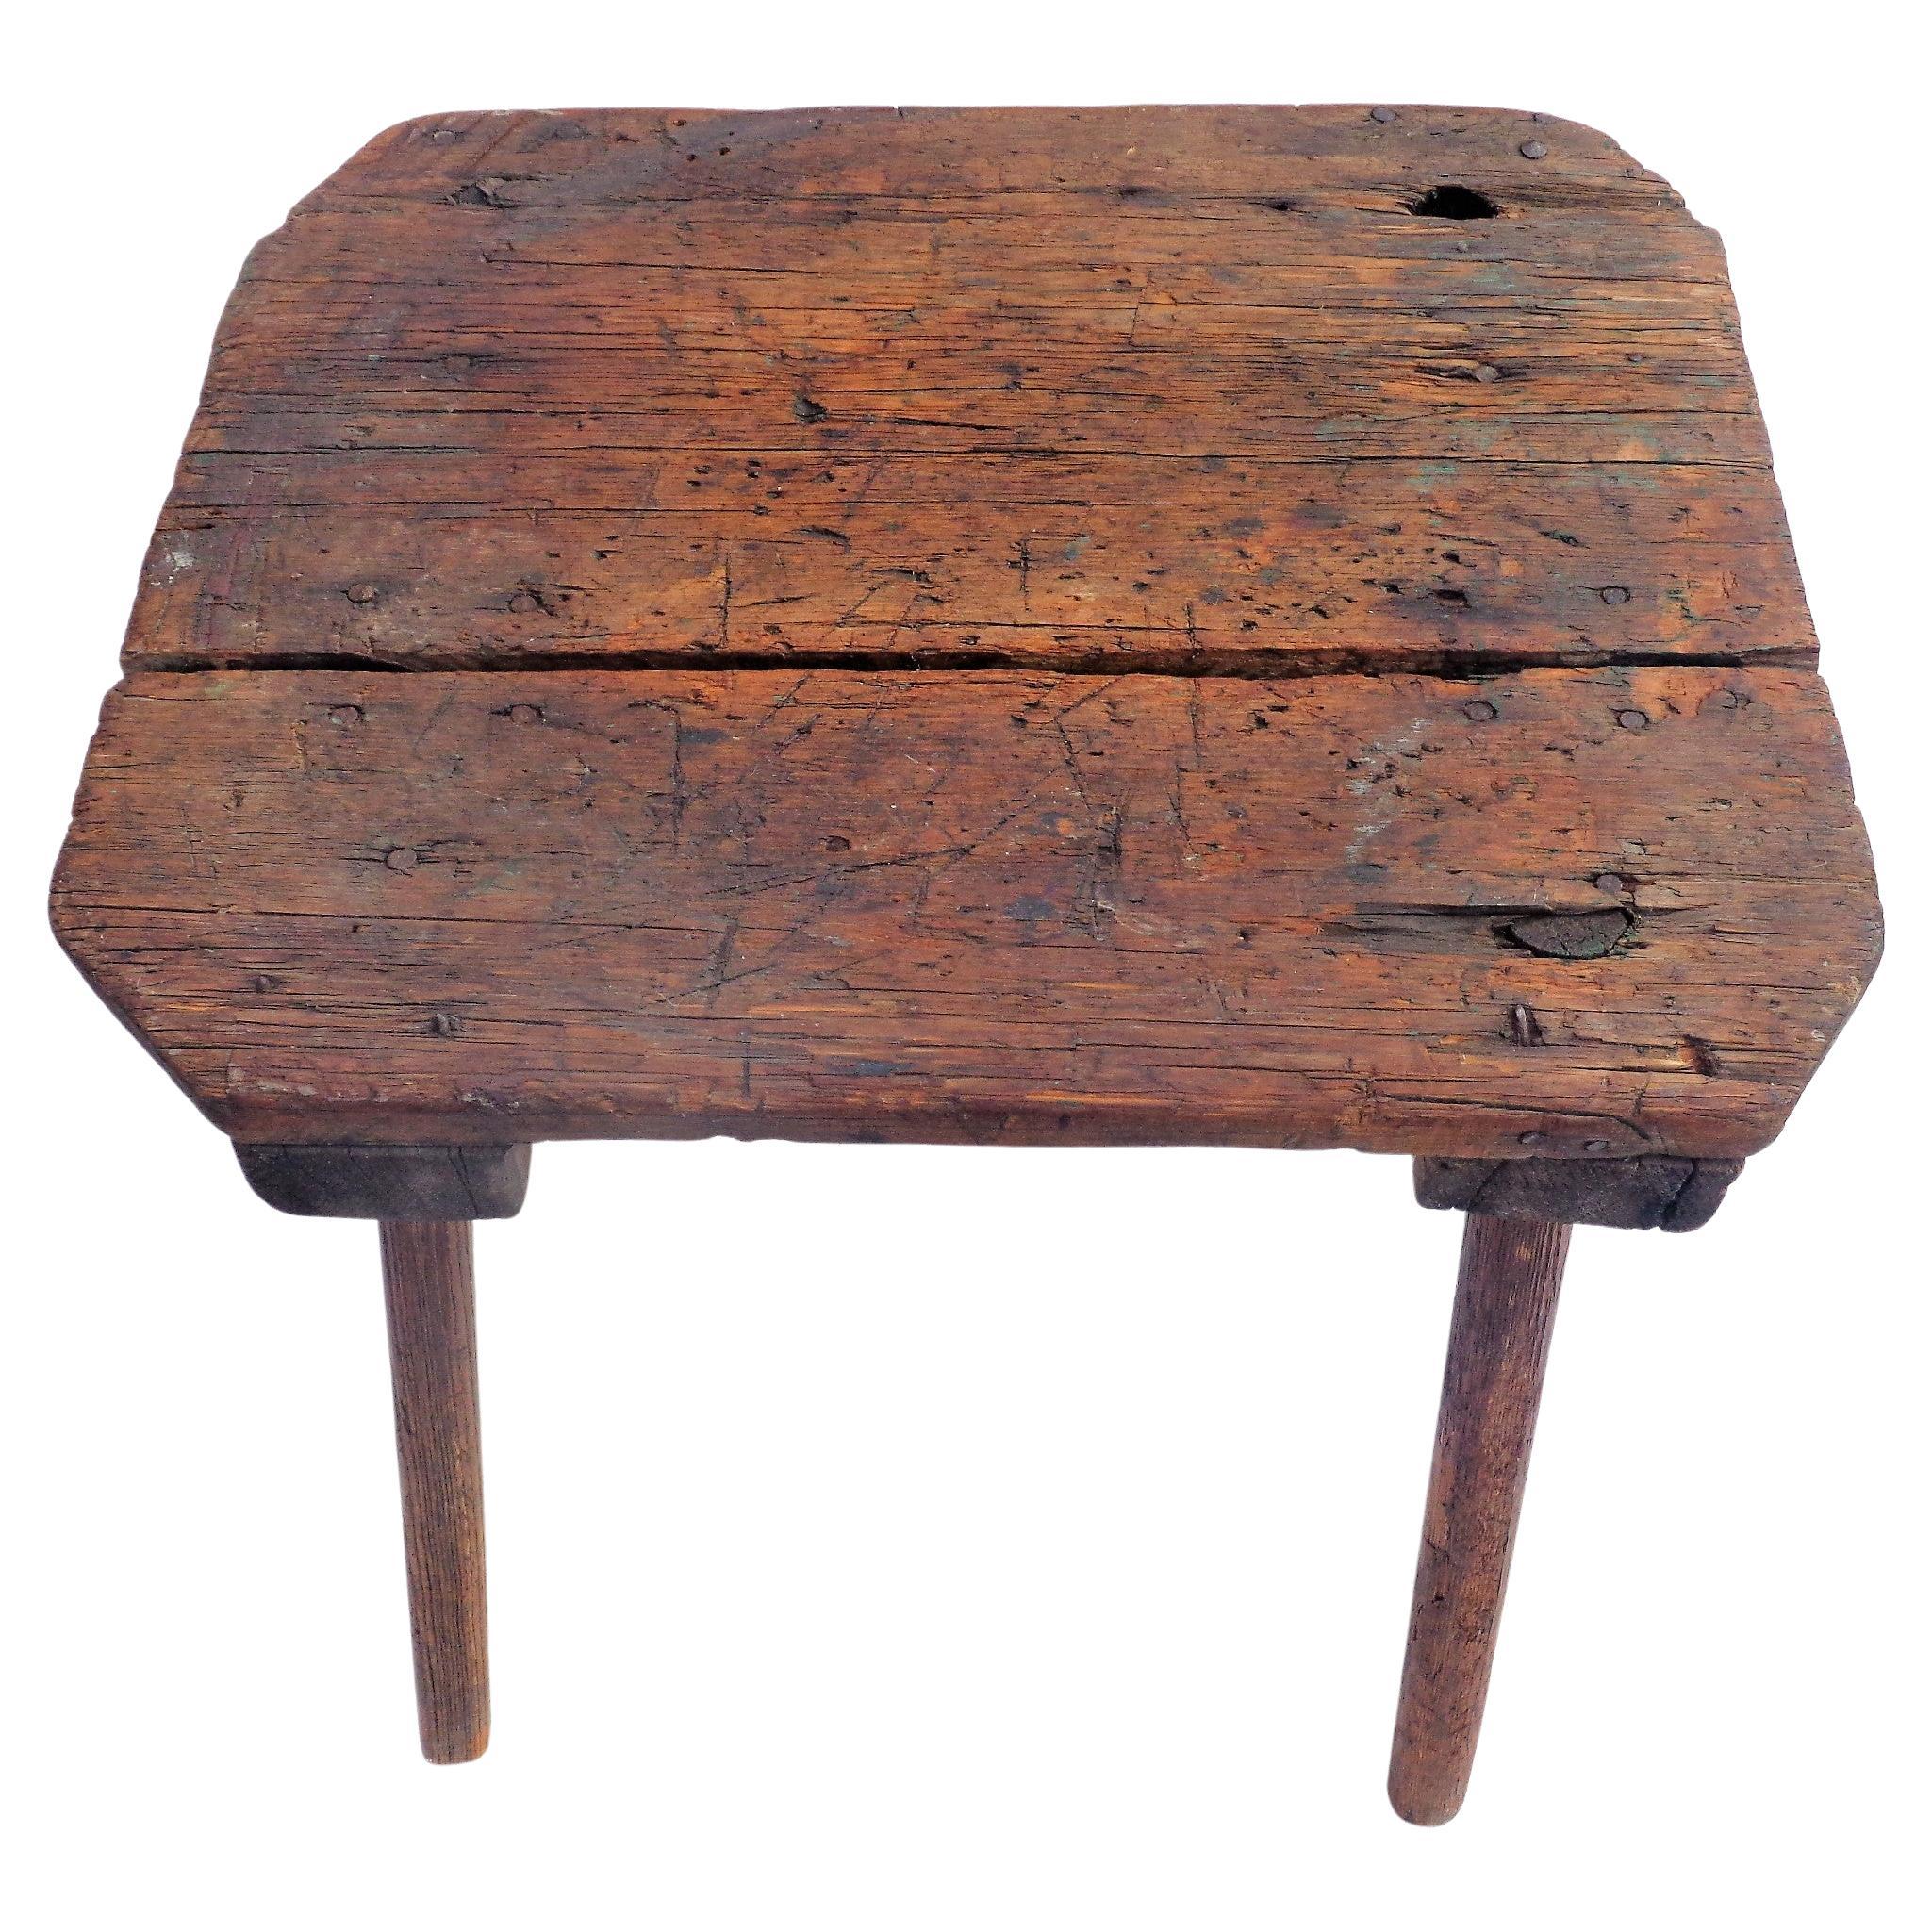 Hand-Crafted Antique American Primitive Table / Stool